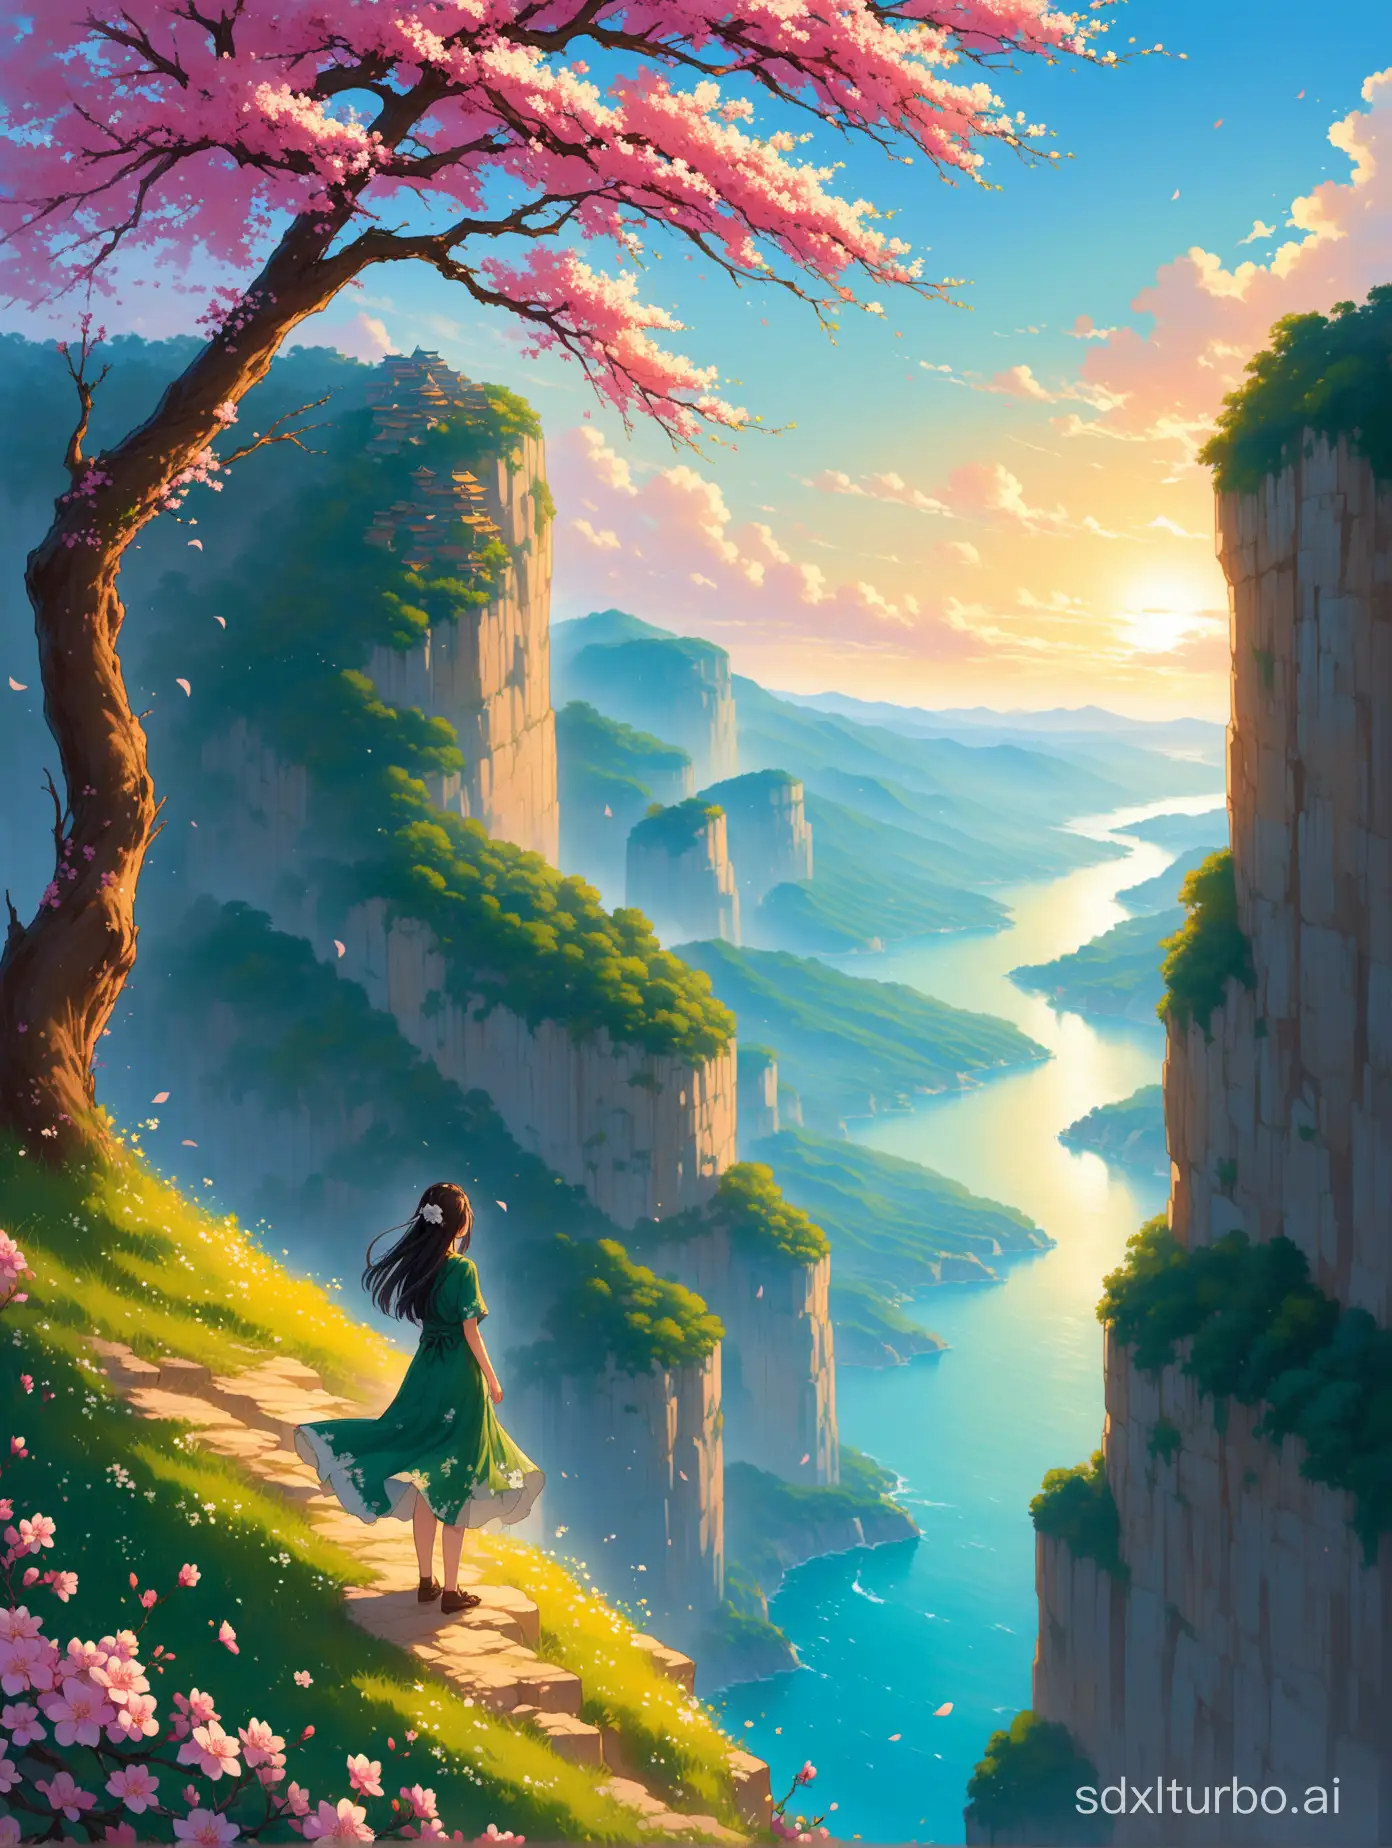 A Chinese girl wearing a tattered dress stood with her back to the edge of the cliff, and the wind lifted and stirred her tattered hem behind her. Beside her, there was a towering tree in full bloom, with flowers blooming on its branches. Behind the girl stood a boy who gazed at her back. Below the cliff in the distance was a city, where war was taking place